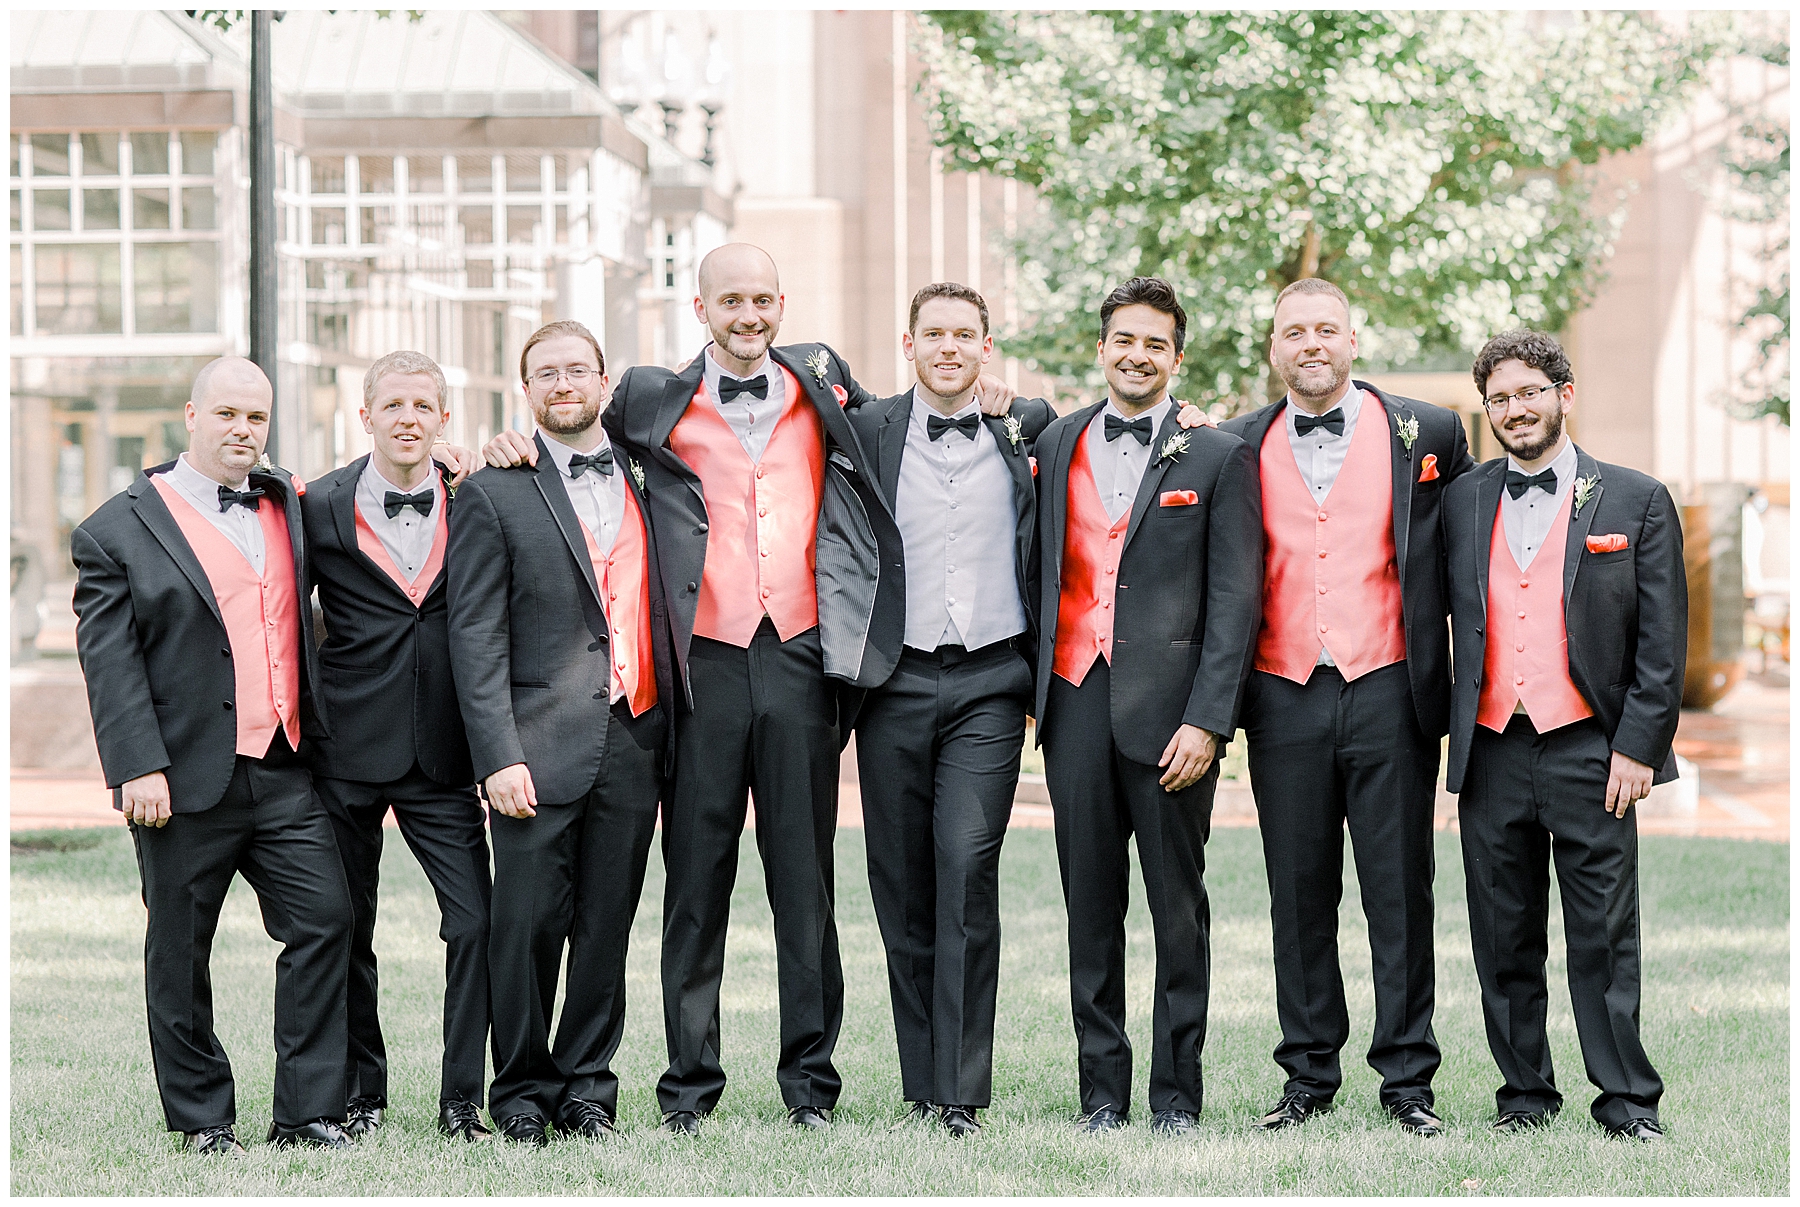 Groom and Groomsmen stand together before wedding ceremony in MA